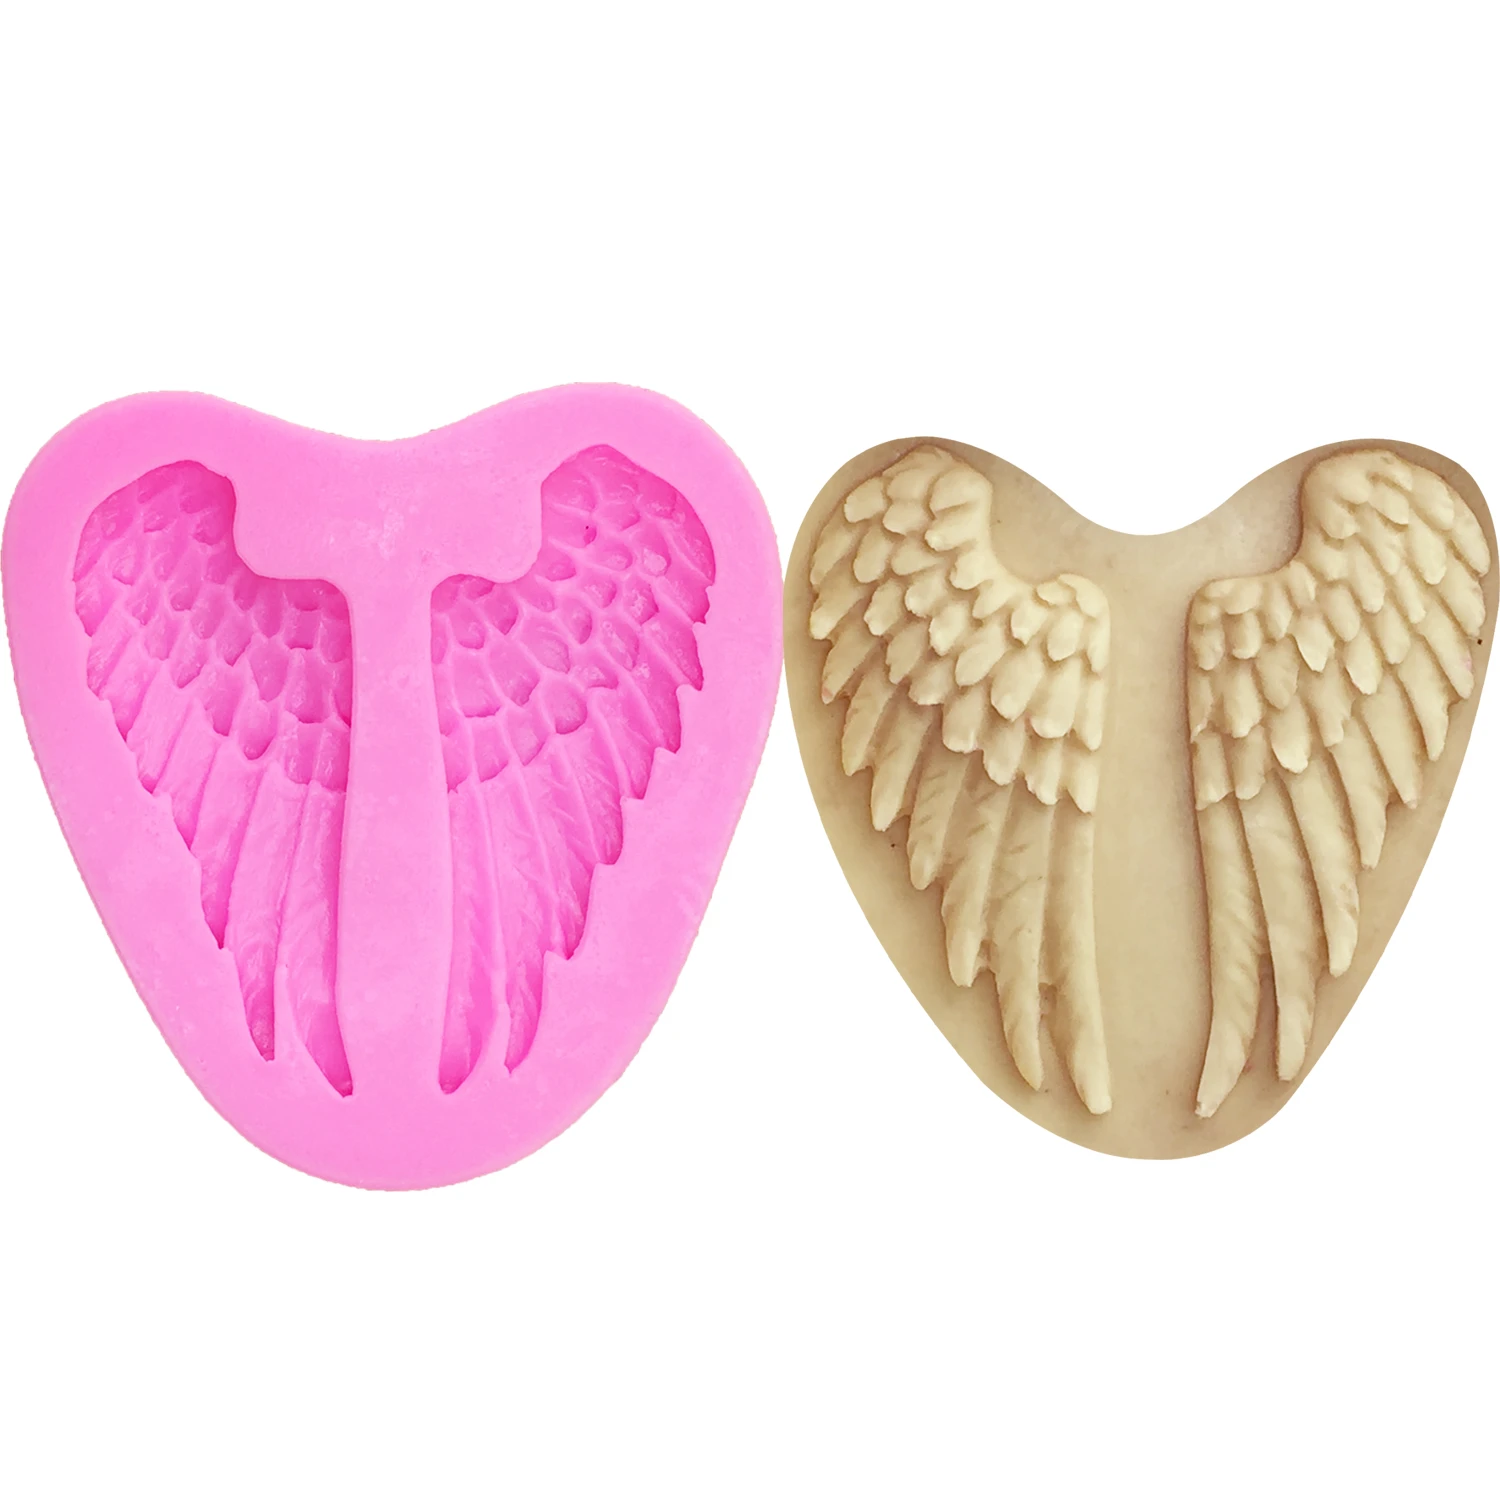 M0227 Angel wings Silicone Mold Fondant Cake Decorating Tools Chocolate Gumpaste Molds, Sugarcraft, Kitchen Accessories